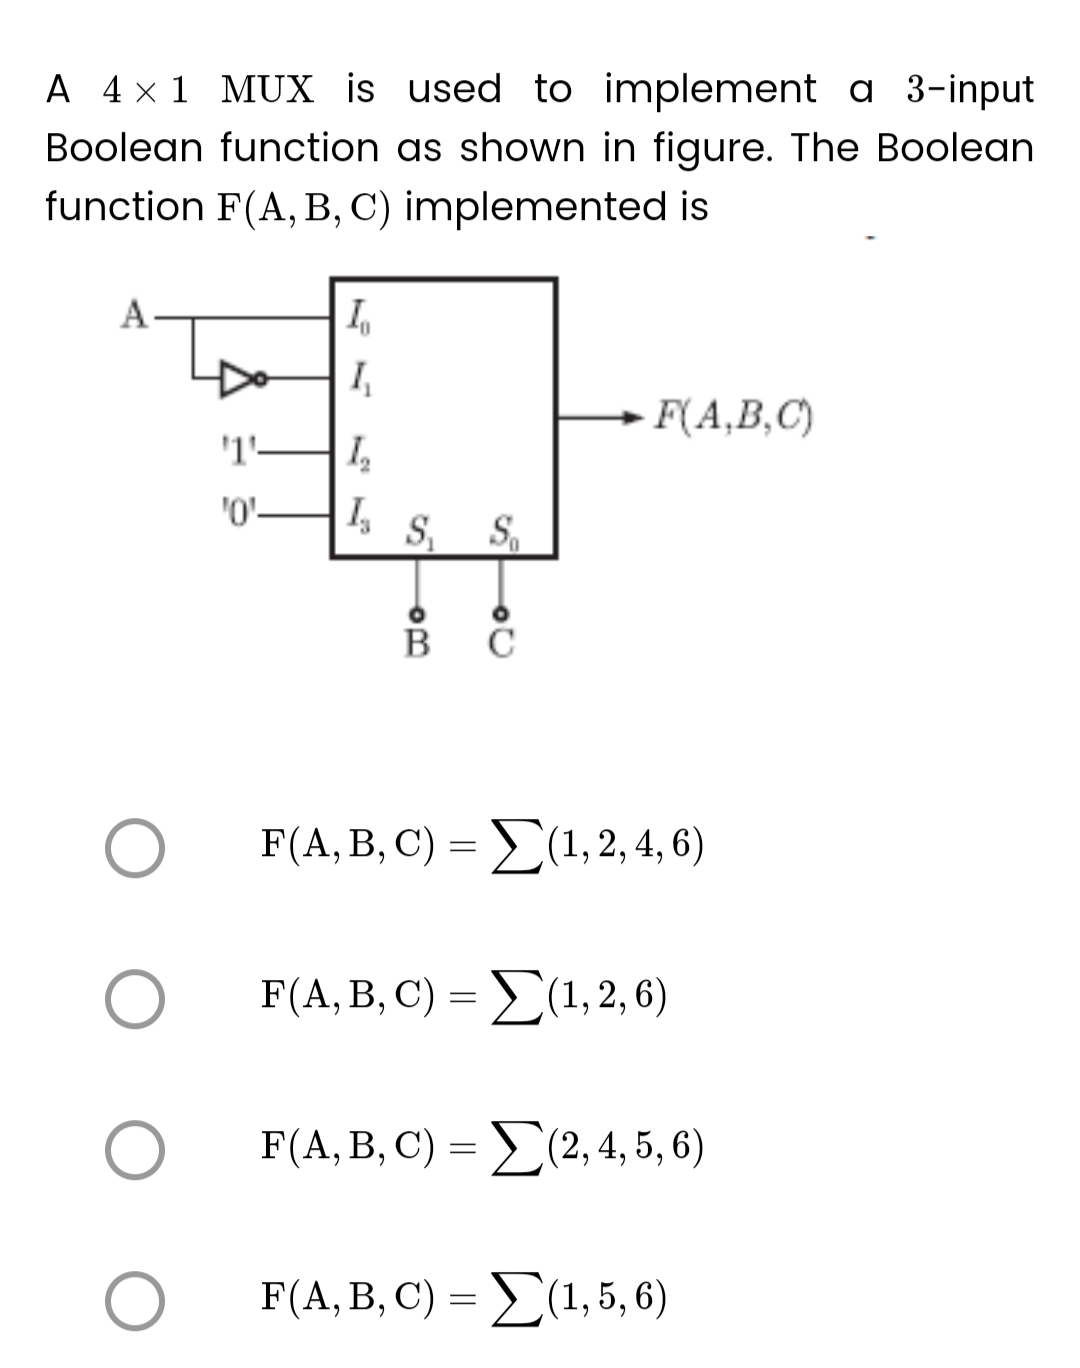 A 4 × 1 MUX is used to implement a 3-input
Boolean function as shown in figure. The Boolean
function F(A, B, C) implemented is
A
O
O
O
'1'
'0'
In
1₂
₂
I₂
S₁ S₁
B
F(A,B,C)
F(A, B, C) = Σ(1, 2, 4, 6)
F(A, B, C) = (1, 2, 6)
F(A, B, C) =(2, 4, 5, 6)
F(A, B, C) = Σ(1, 5, 6)